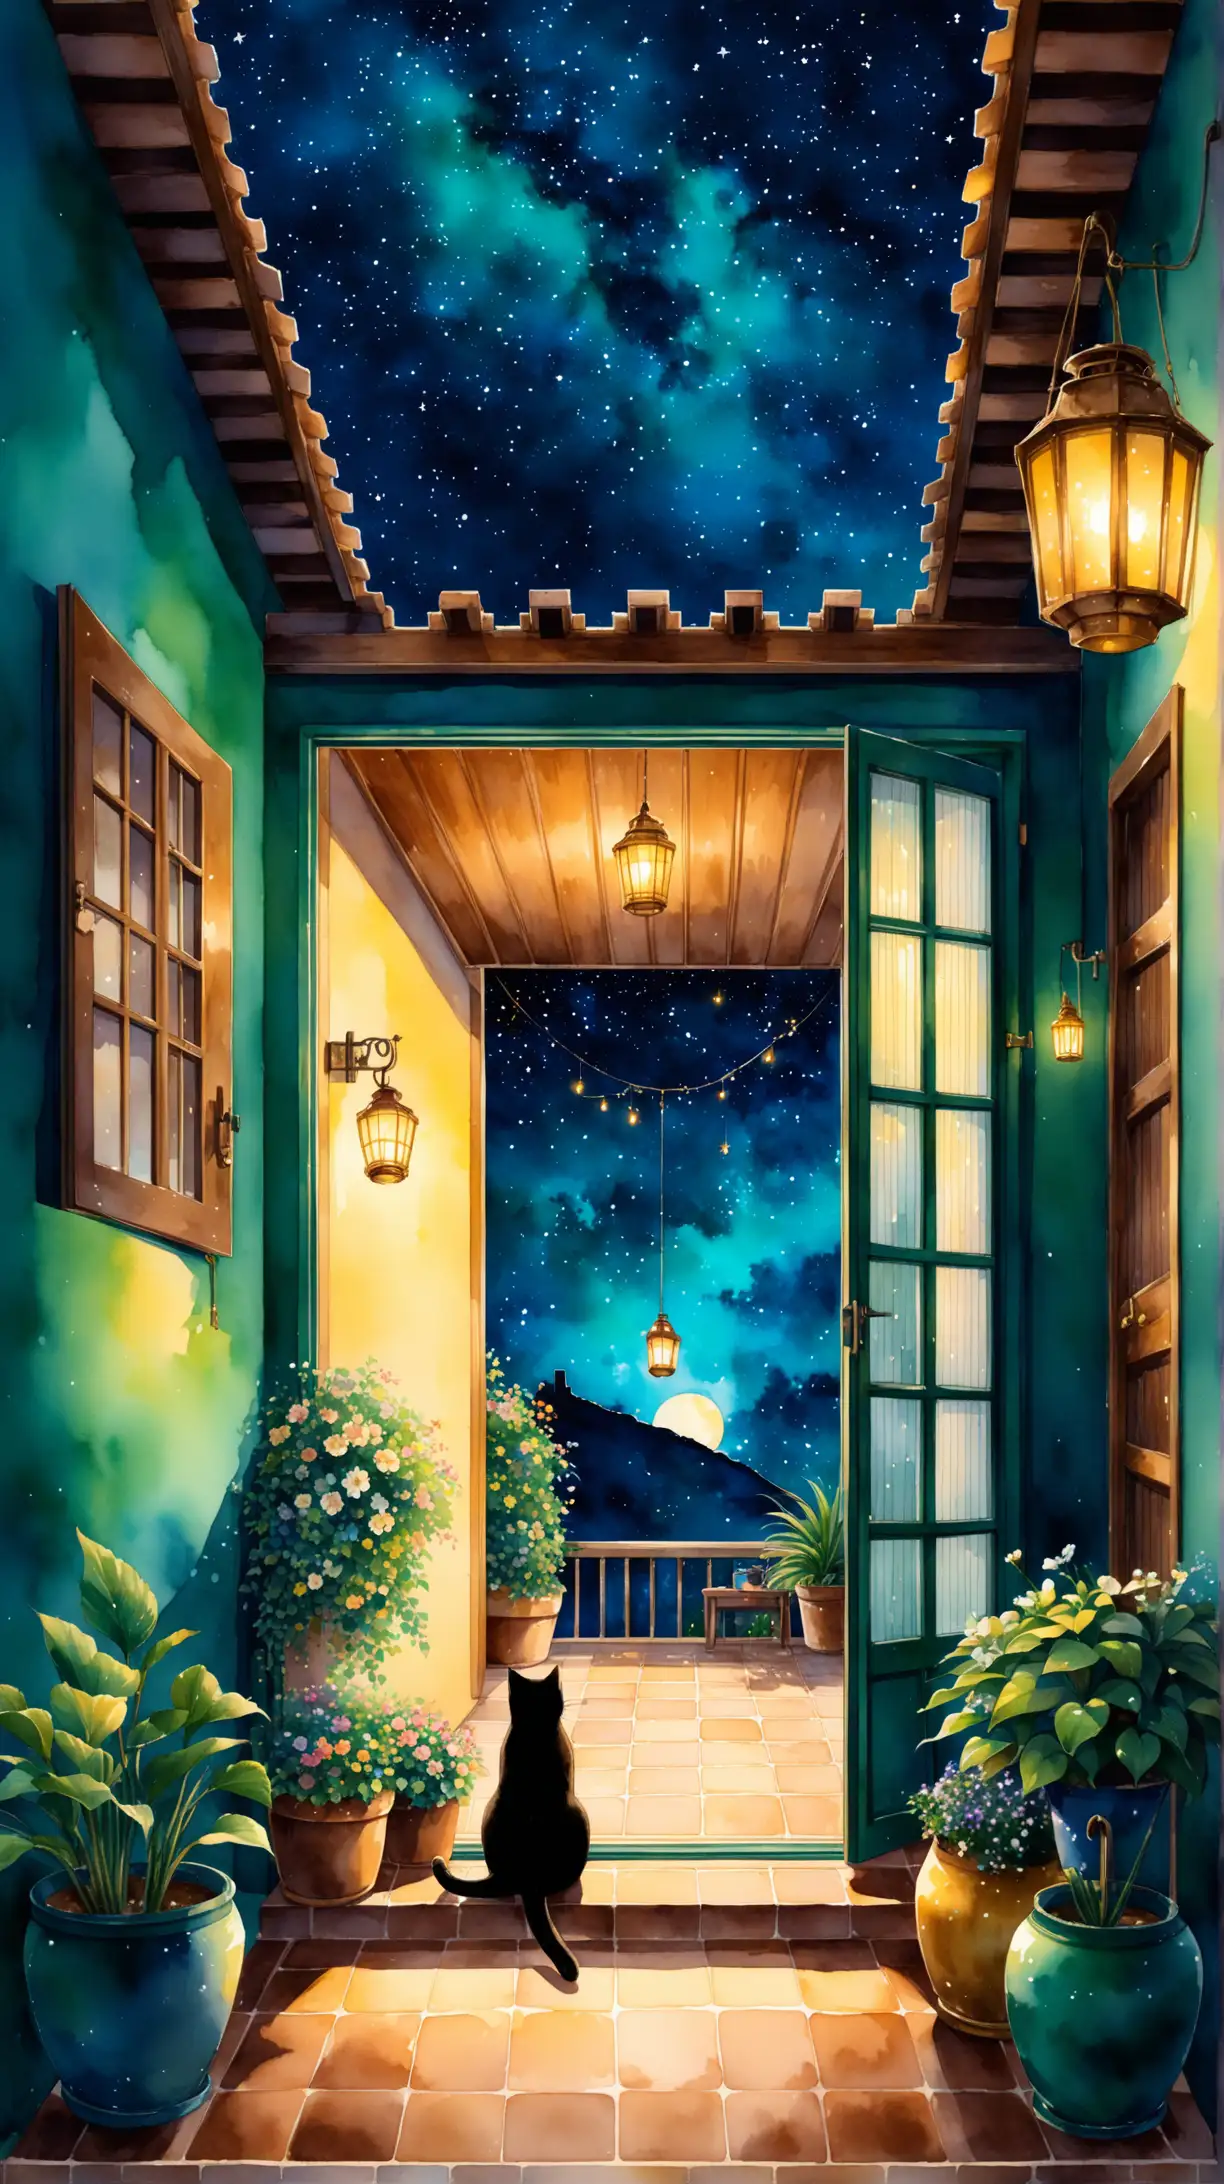 view from inside house to outside through opened door and a beautiful cat sitting by the opened door look outside to the dark night starry sky, pots of plants, pots of flowers, one lantern hanging on the ceiling,  window with tile curtain, palette colors of dark blue tosca, dark blue, green tosca,  gold yellow, 8k render, watercolor painting